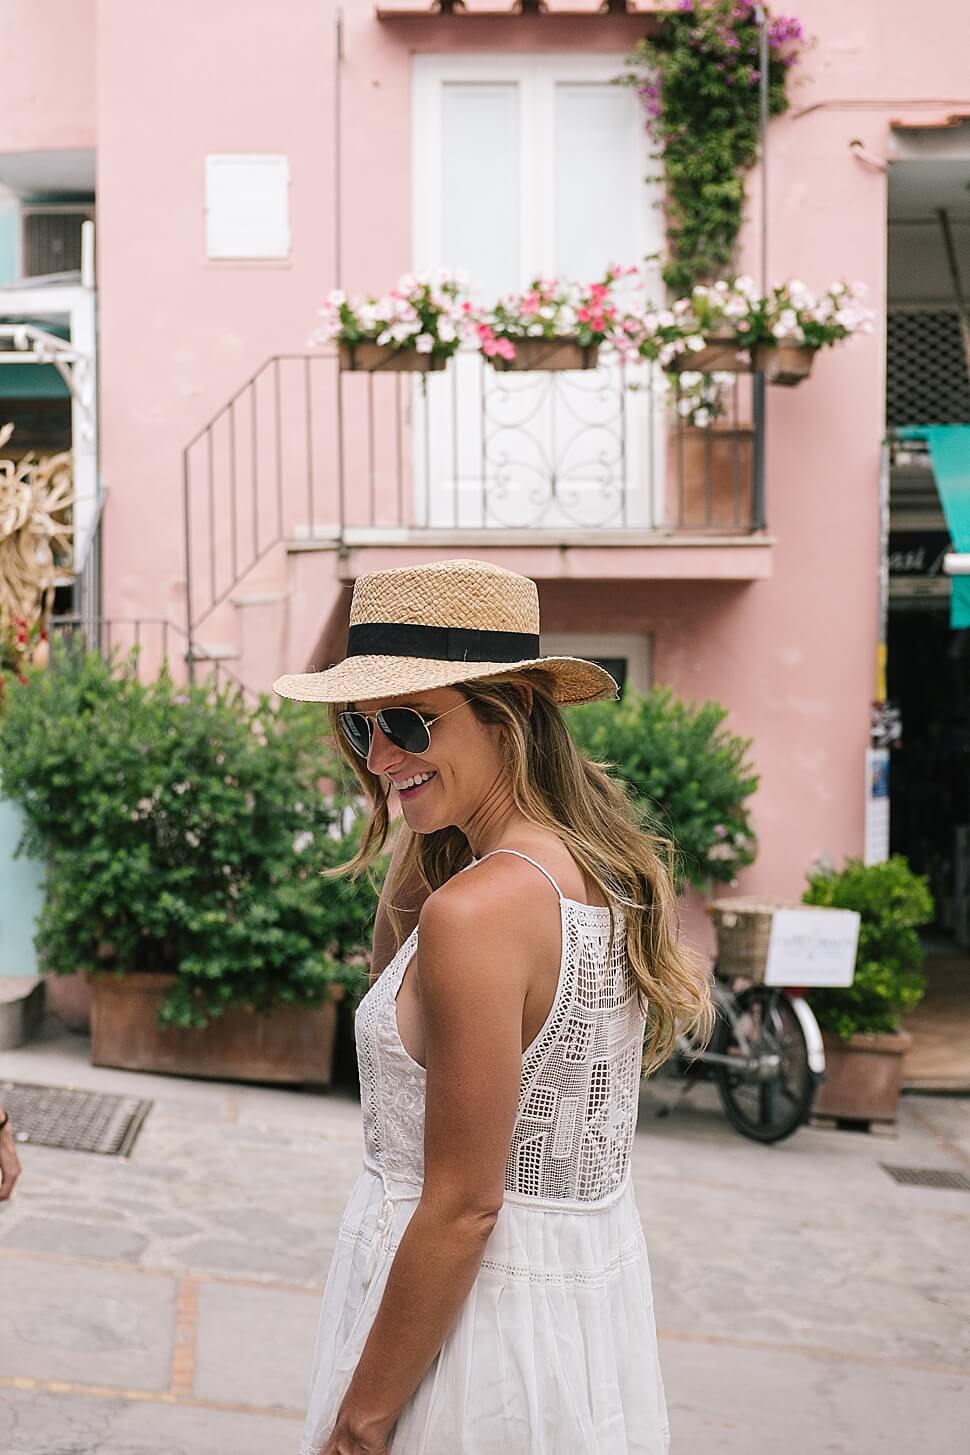 what to wear in italy in june little sundress and flats